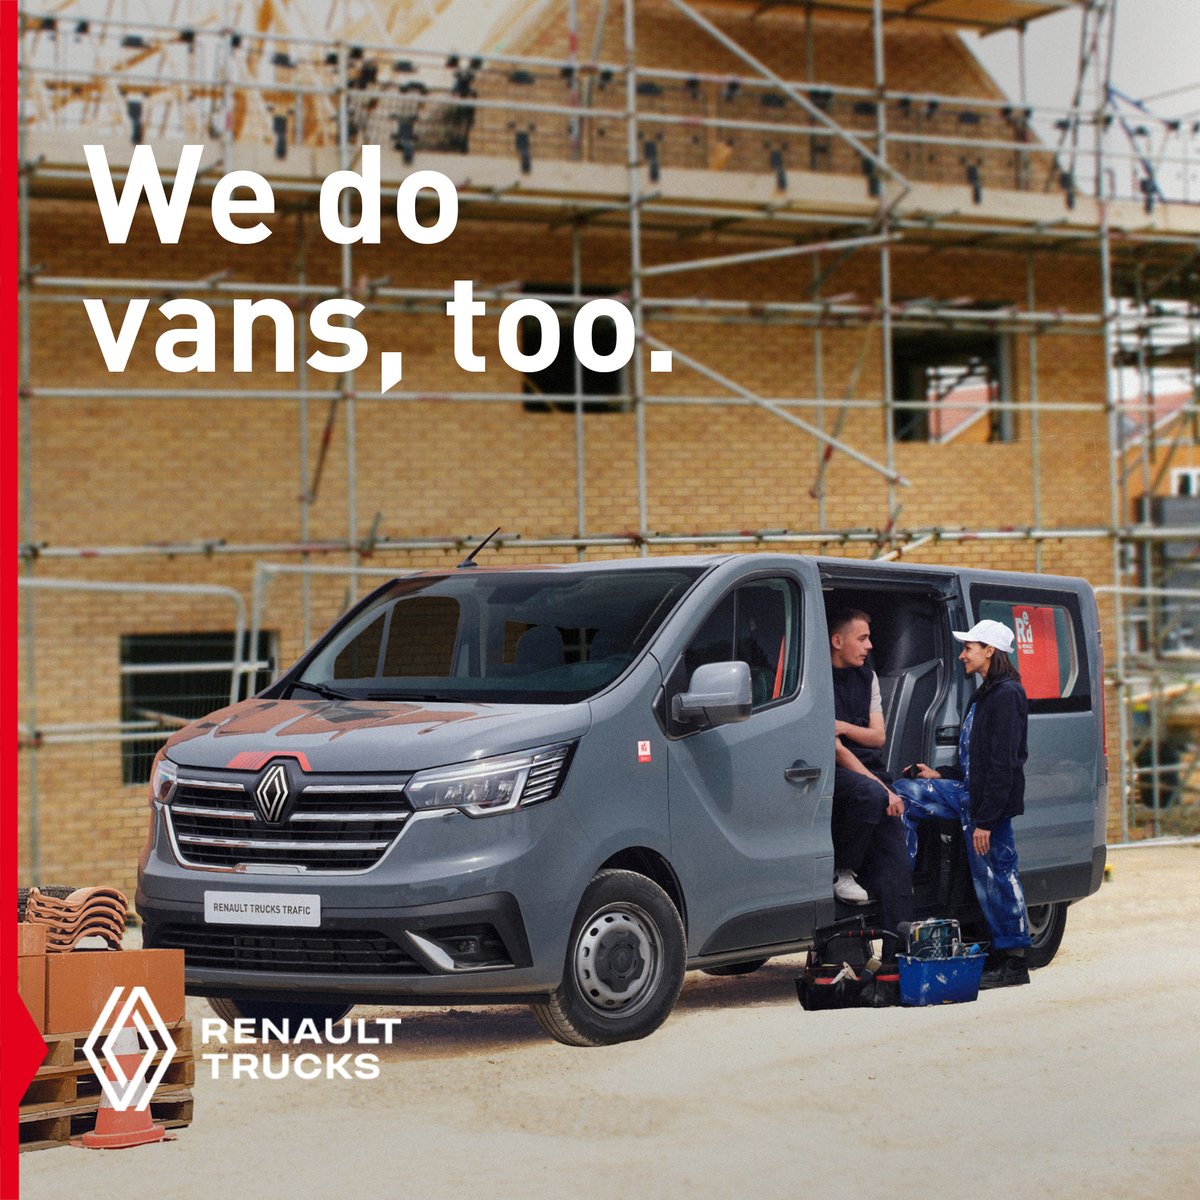 📢 Listen out for our Trafic van ad, “We do vans, too”, coming to the airwaves near you! Available in both diesel and electric models, our Trafic van is ready to graft as hard as you do. Book a test drive today 👉 bit.ly/3QrjGgt